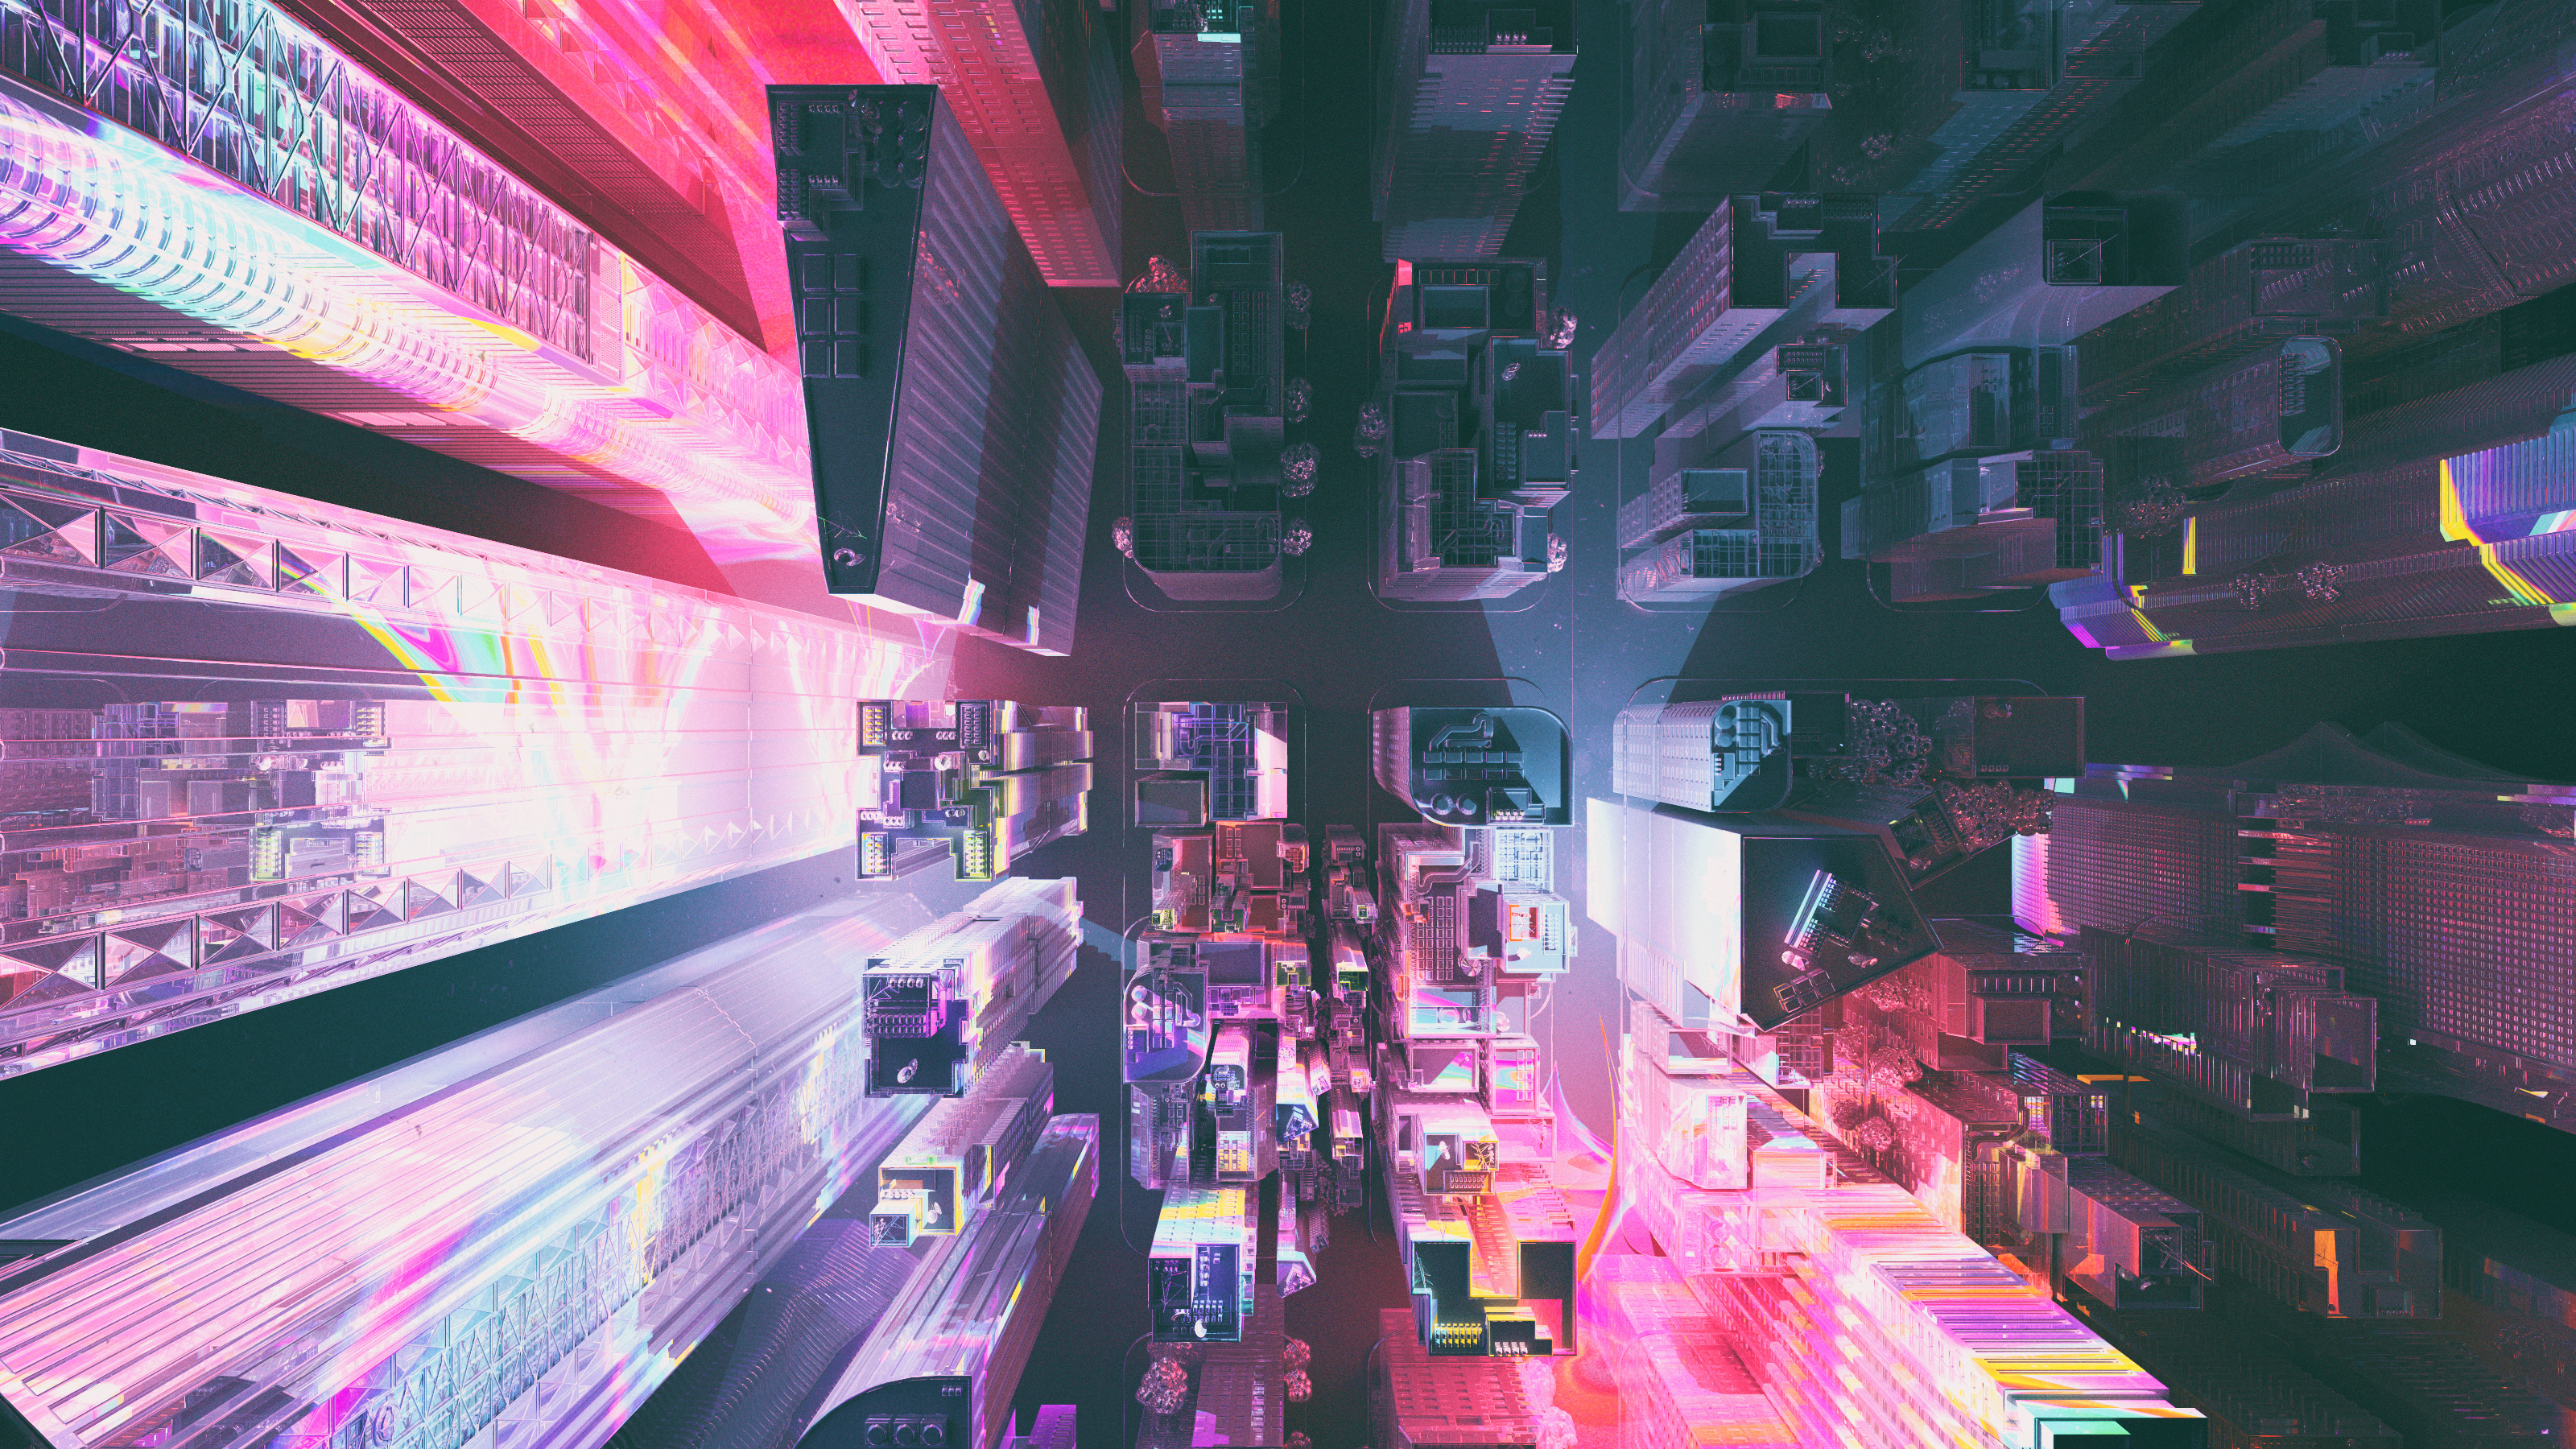 Top down view of city by Mike Winkelmann